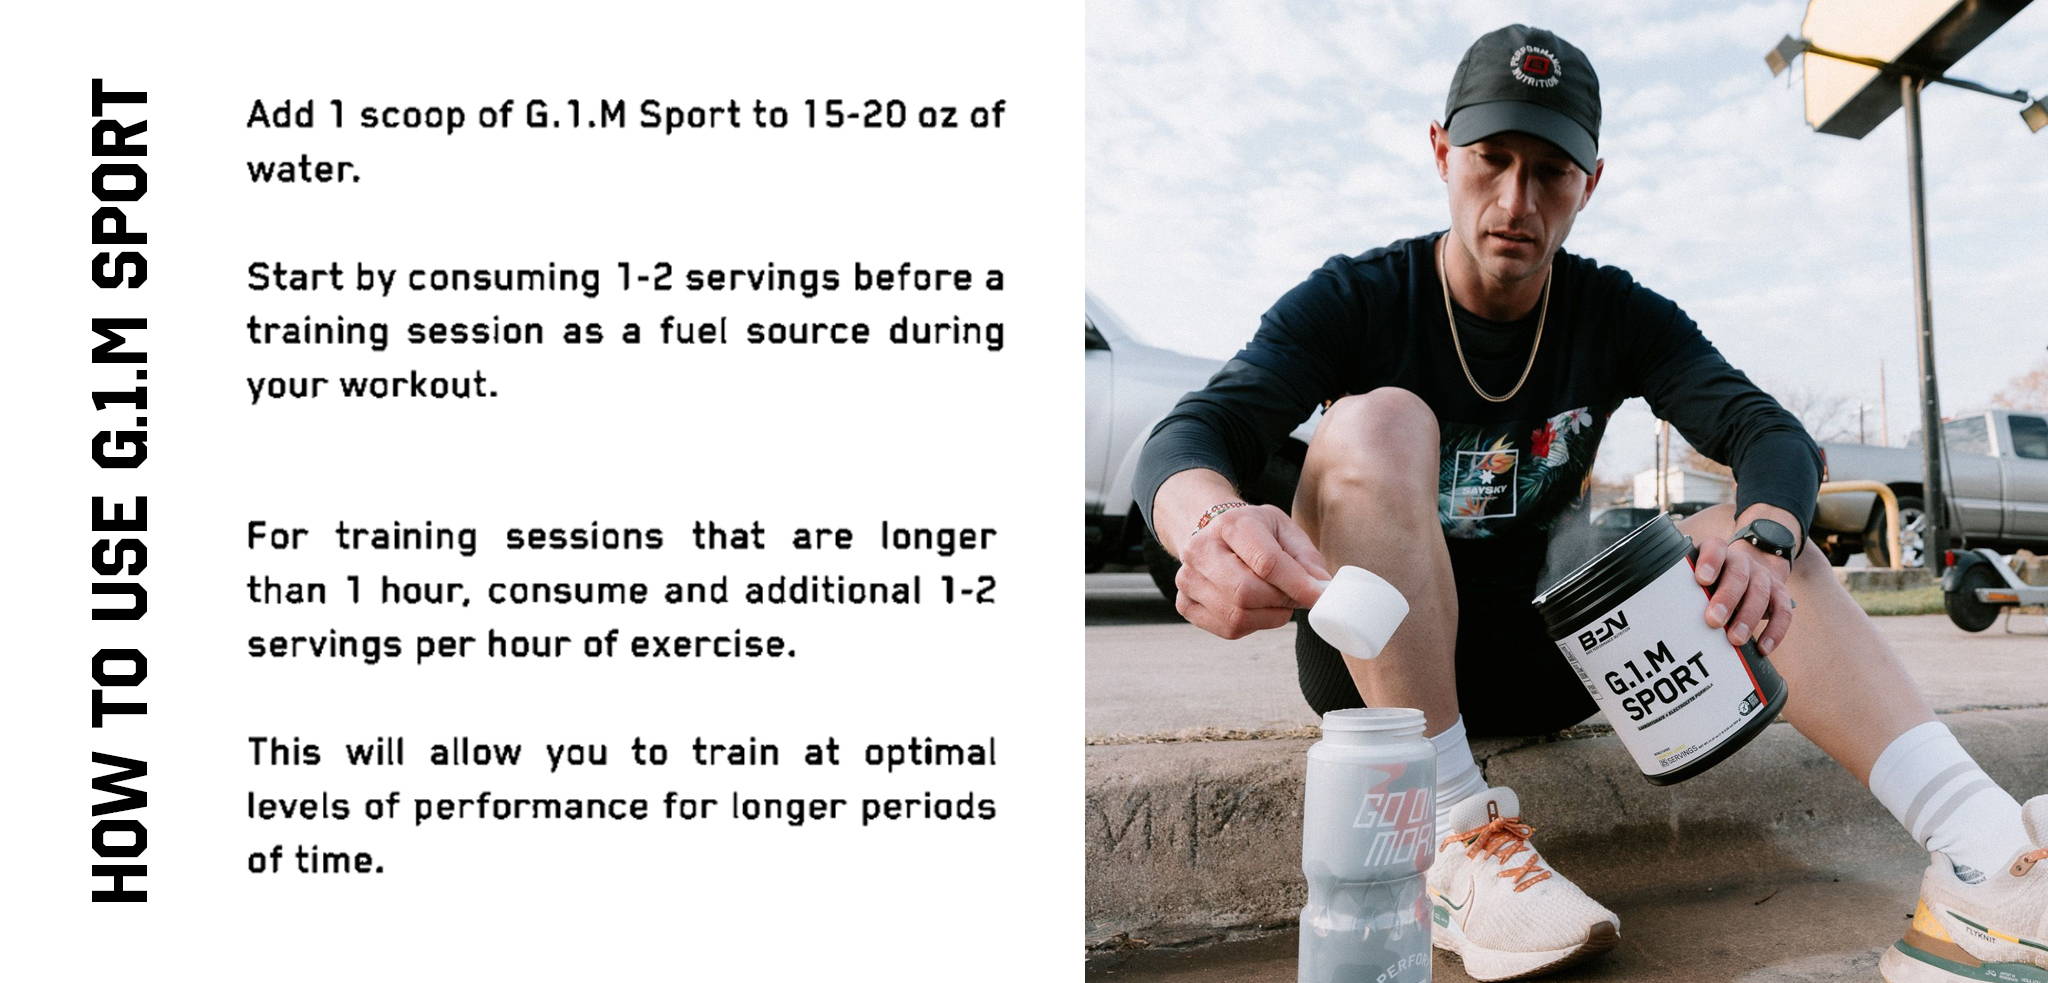 How to use G.1.M Sport infographic.